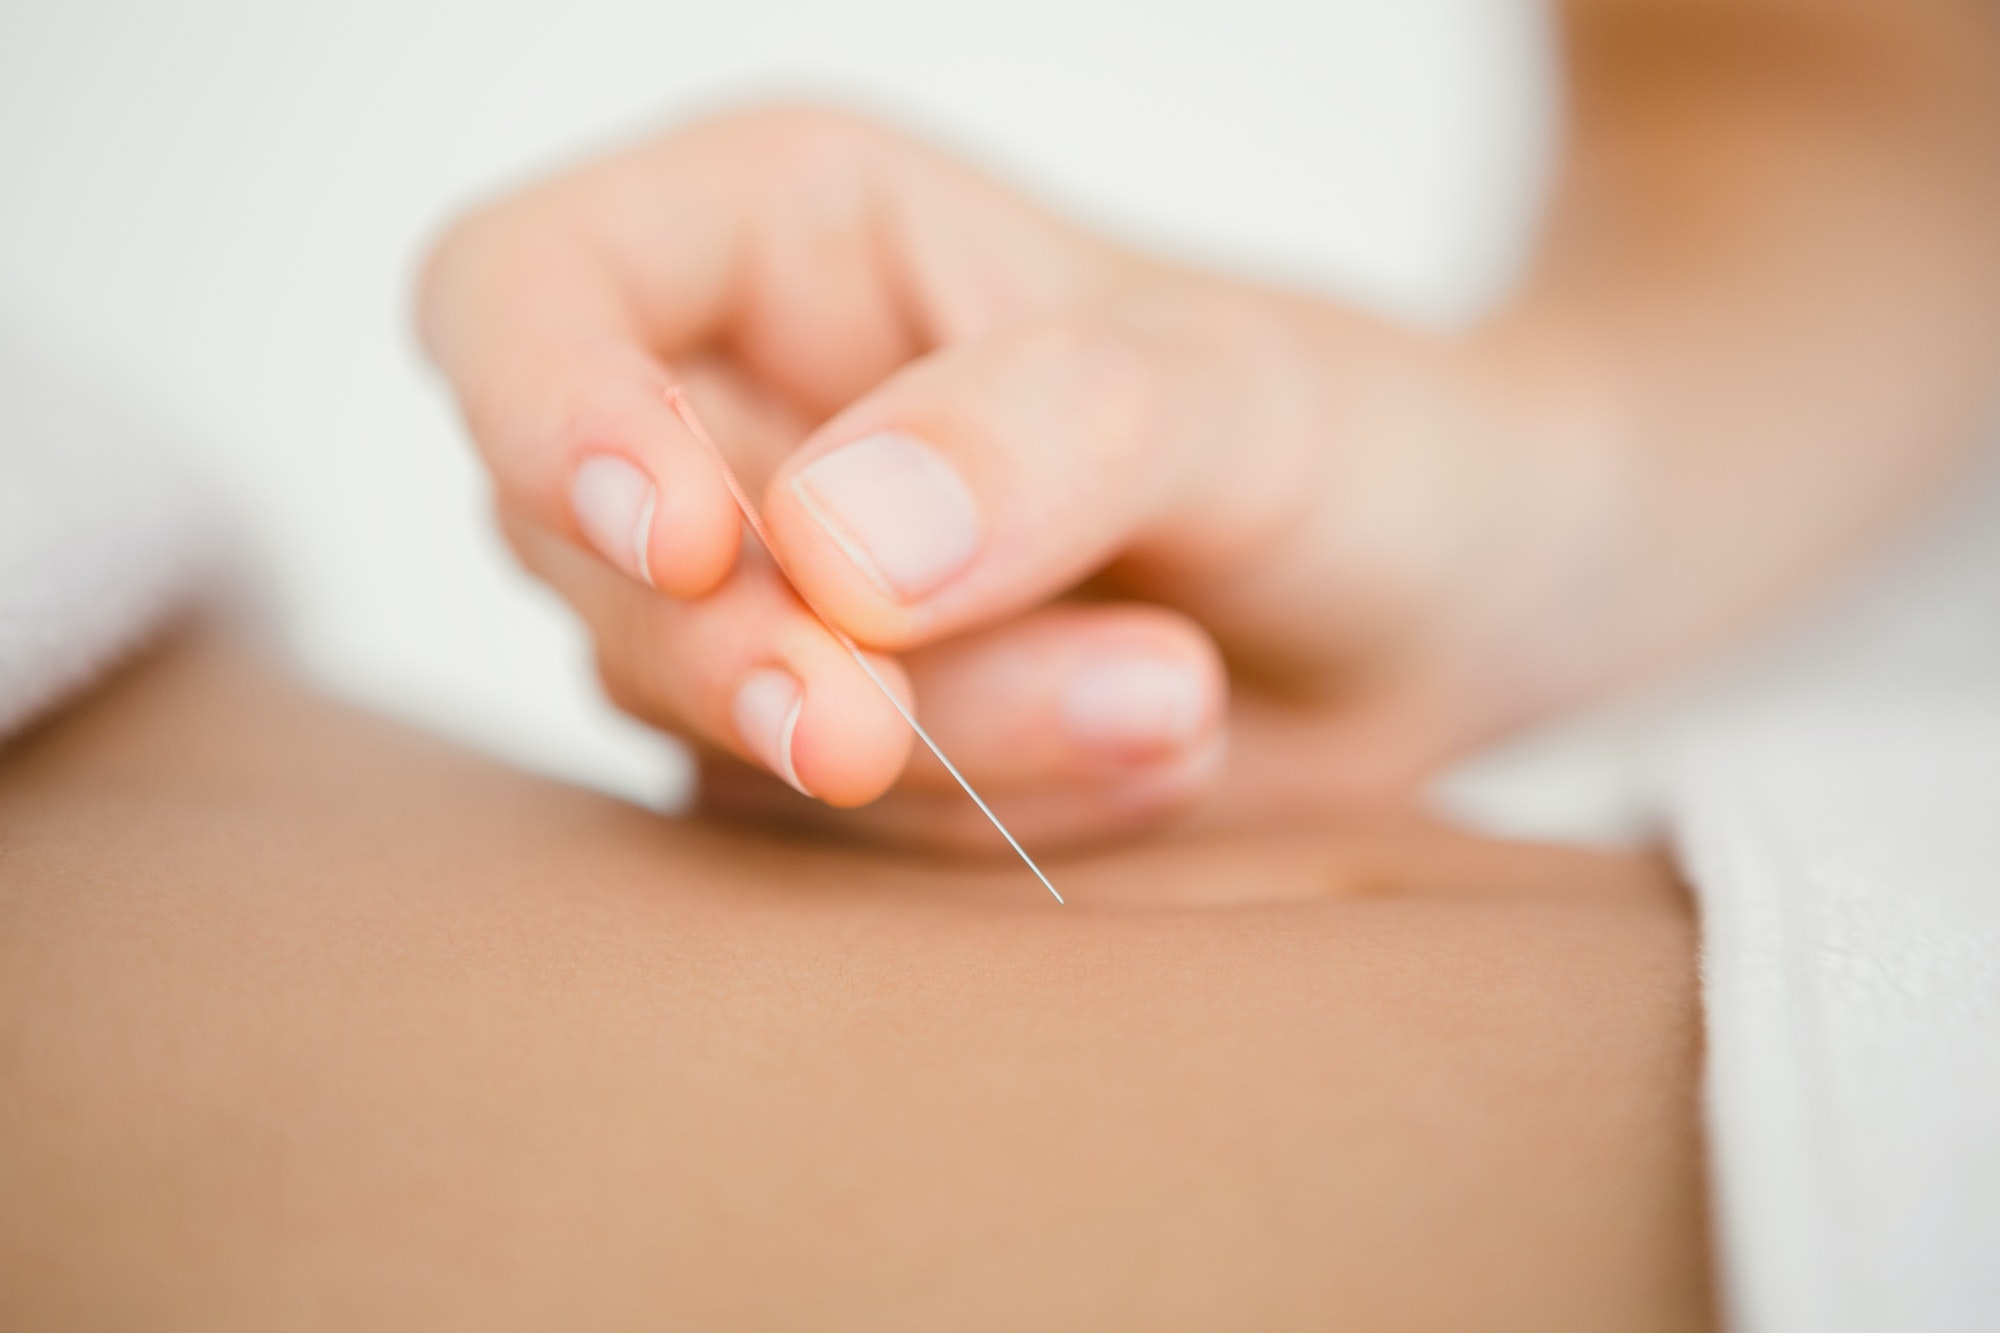 Close up view of woman holding a needle in an acupuncture therapy